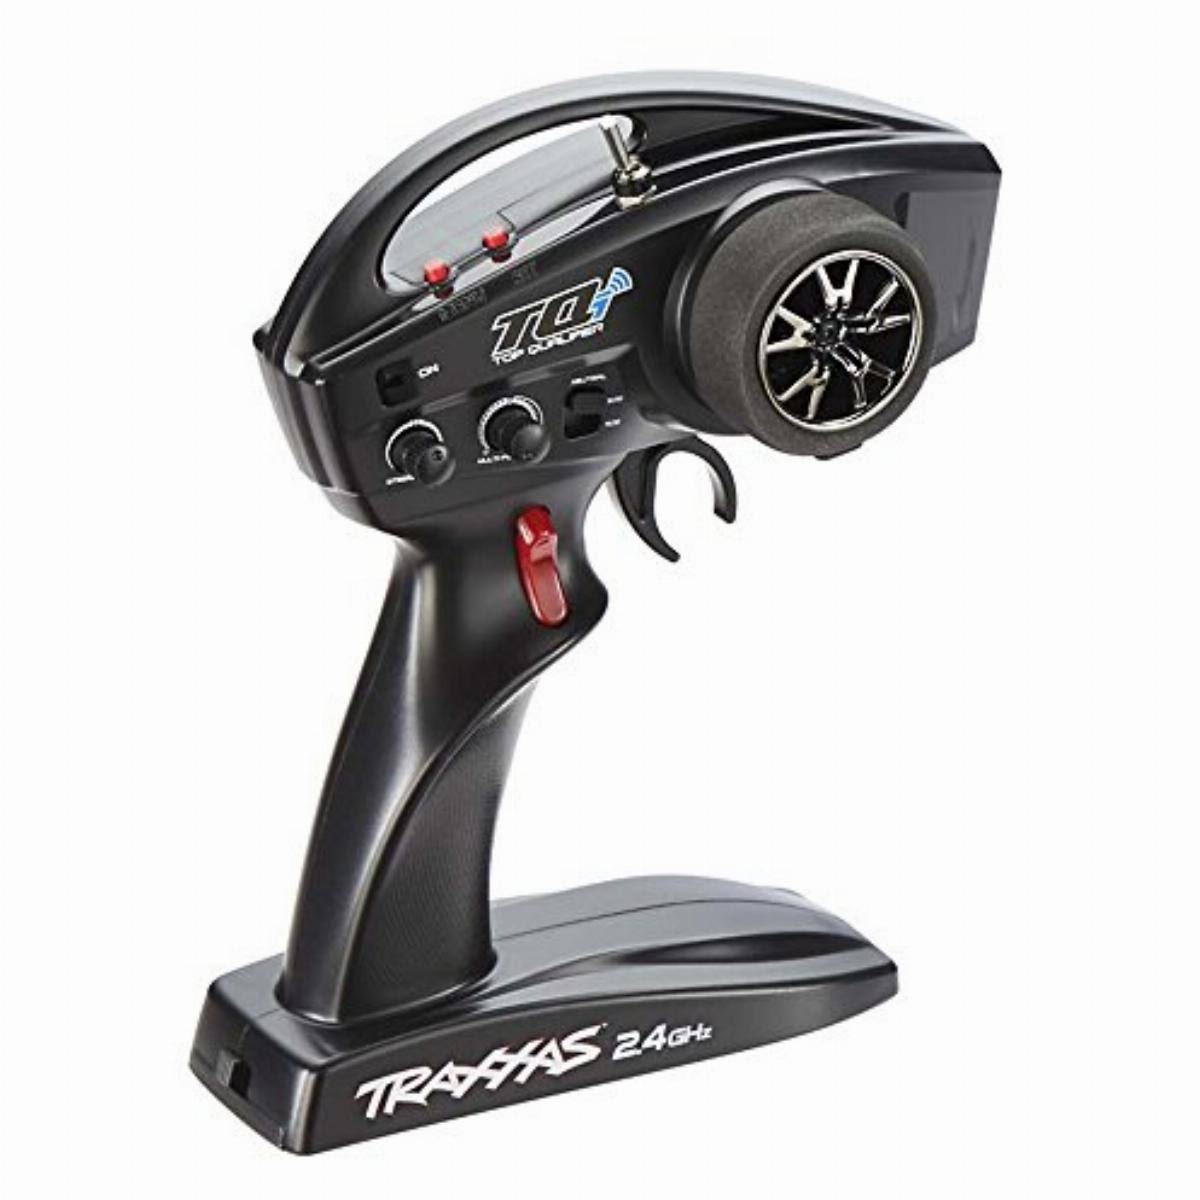 Traxxas Link Enabled Hi Output Vehicle Transmitter - 2.4ghz, 4 channel